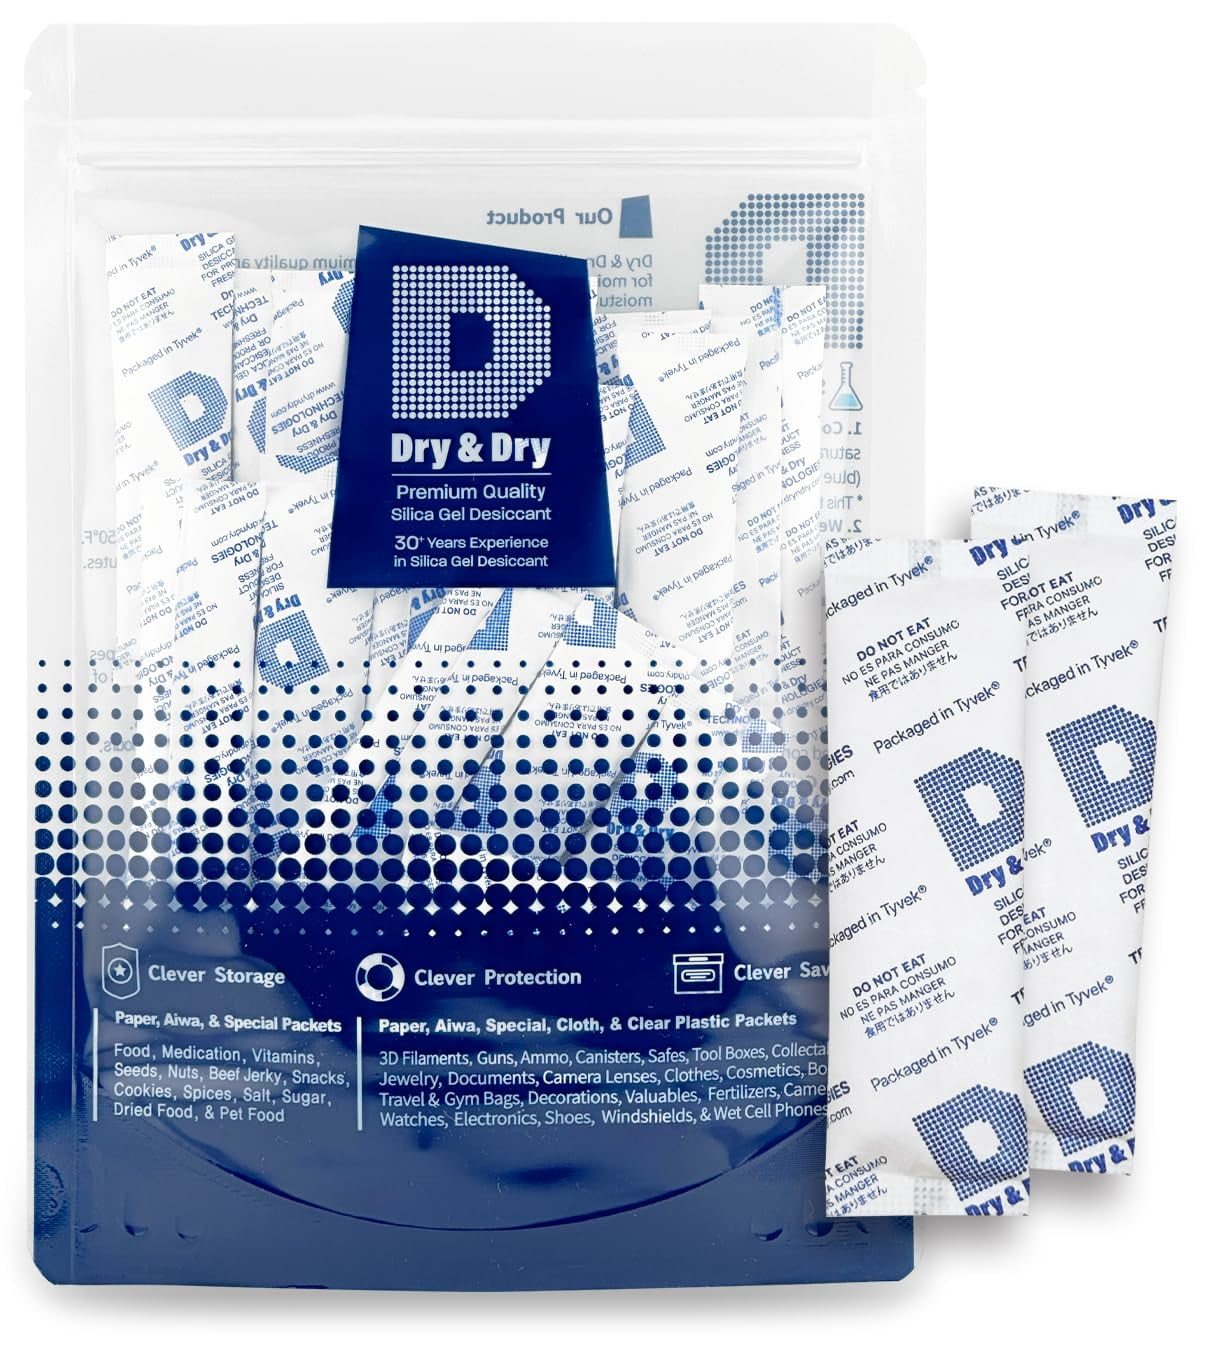 Dry & Dry 5 Gram[50 Packets] Food & Pharmaceutical Safe Silica Gel Packs  Desiccants - Rechargeable Tyvek® Silica Gel Packets, Moisture Absorbers